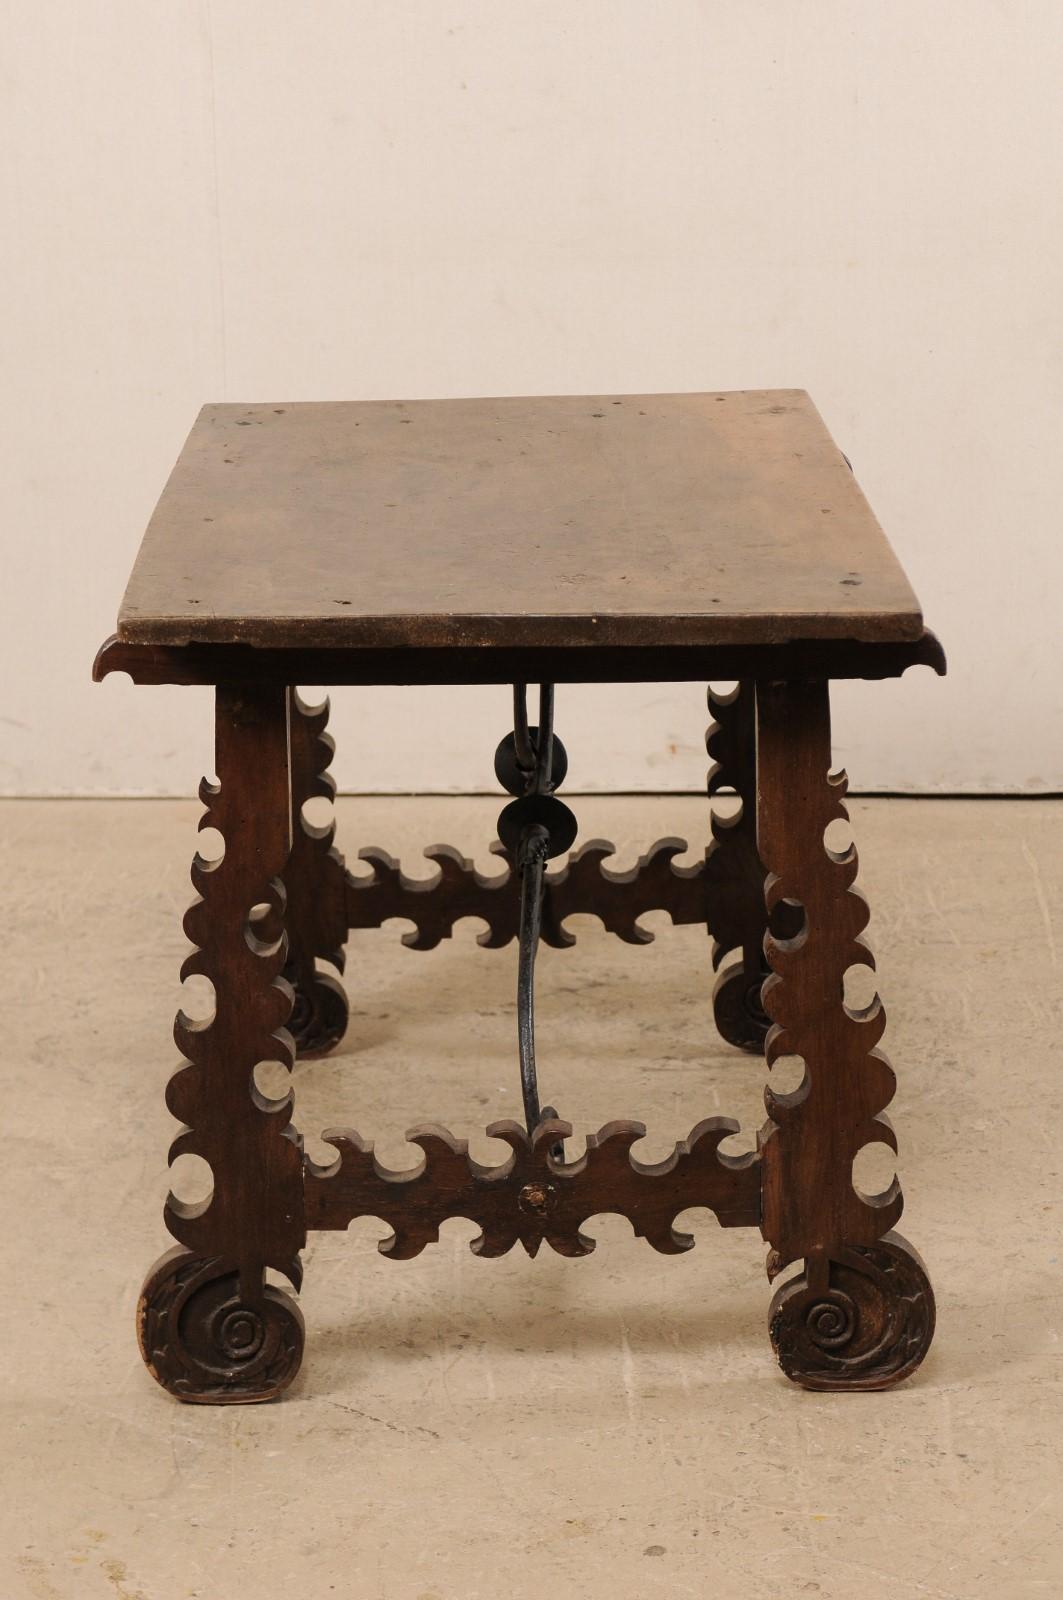 Spanish Baroque 18th Century Lyre Leg Wooden Trestle Table with Iron Stretcher For Sale 1